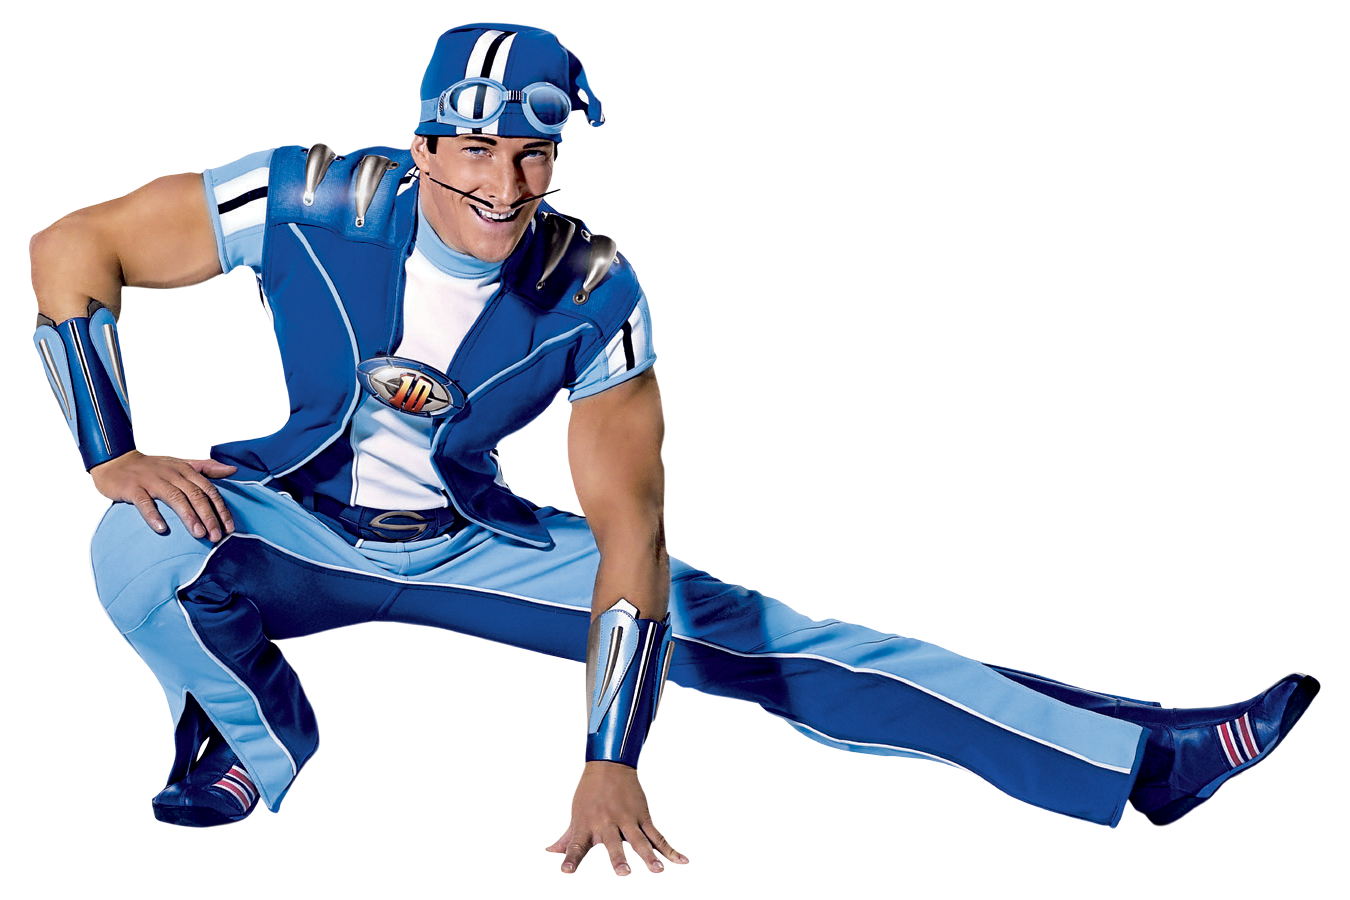 sportacus games lazy town